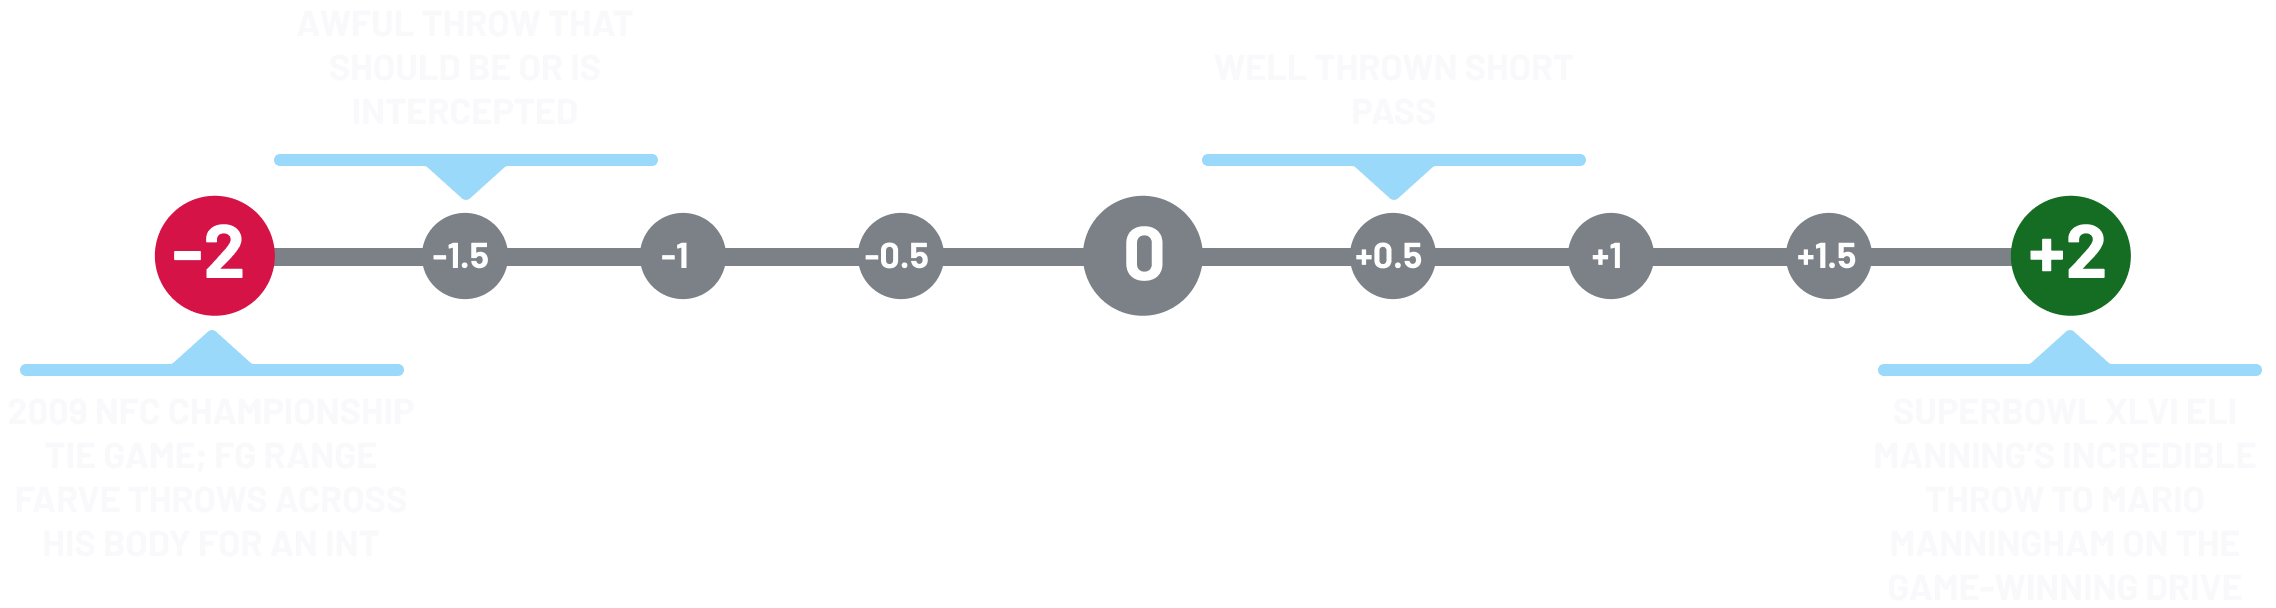 Idea of how PFF grades plays: -2 for fg range int, -1.5 for bad throw that should be int, +0.5 for a well thrown short pass, +2 for incredible throw